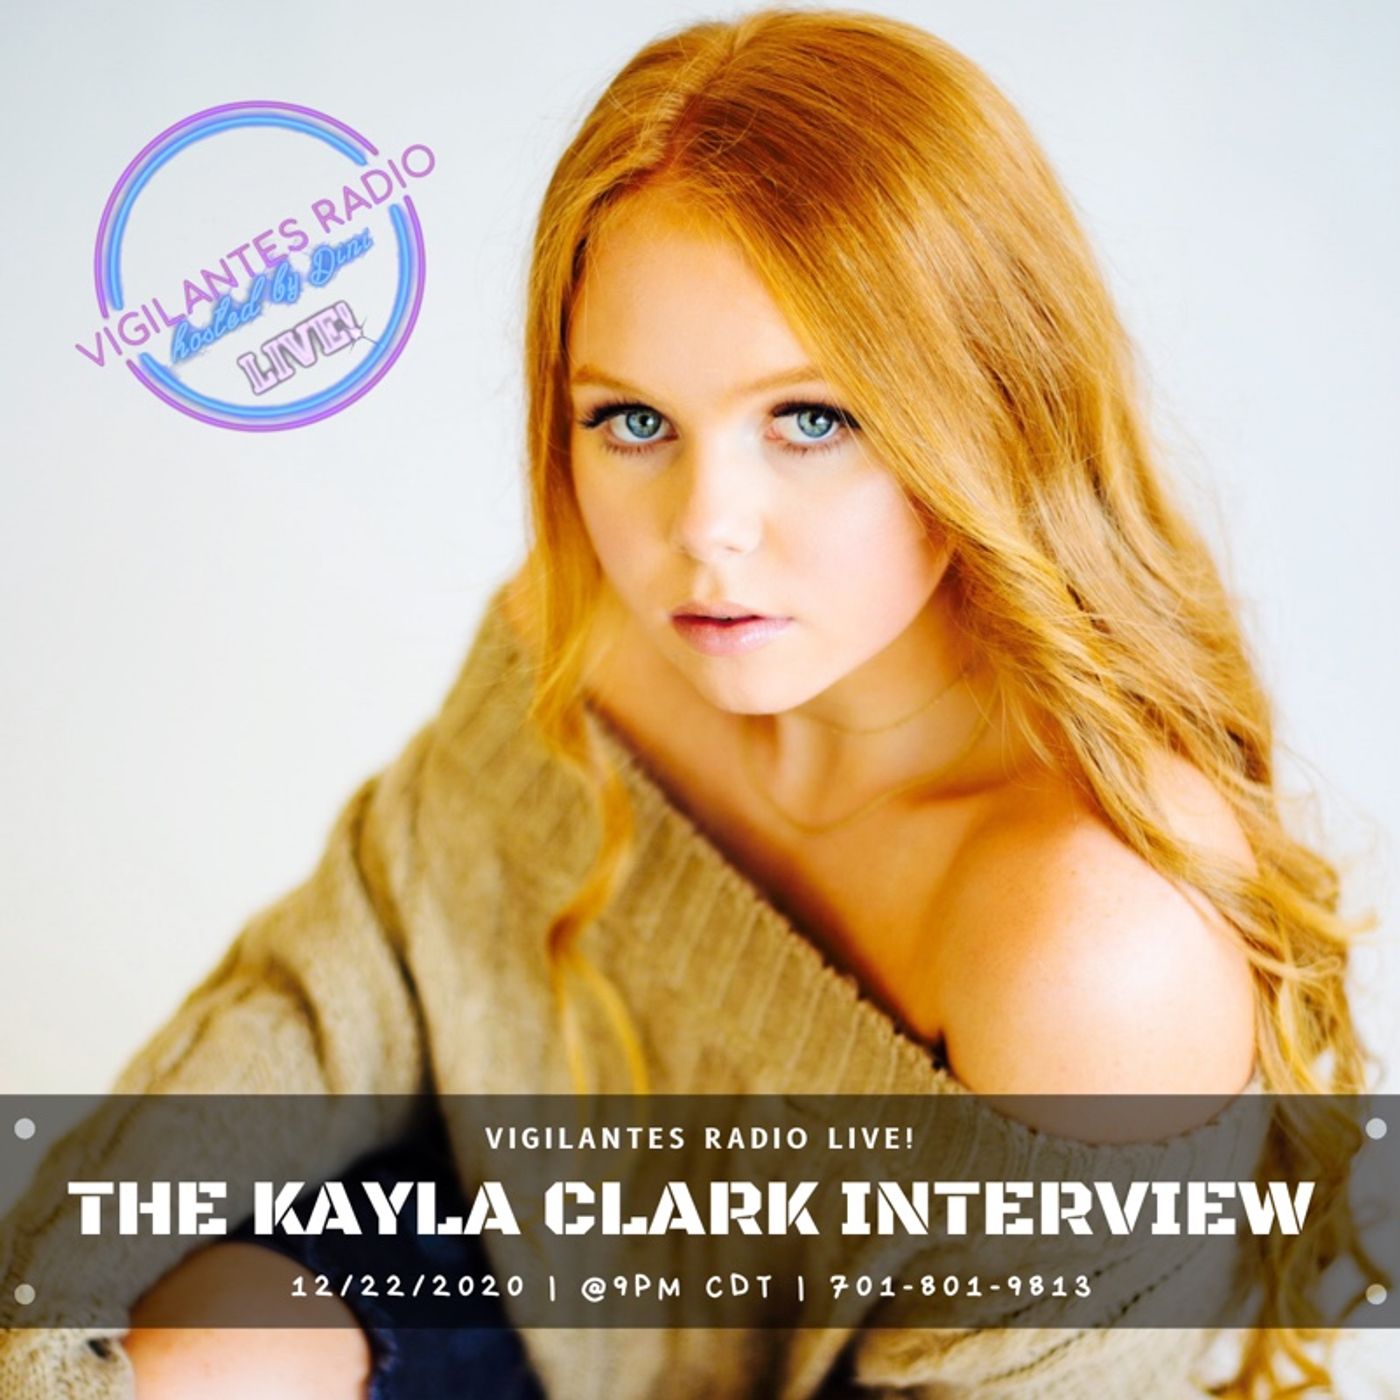 The Kayla Clark Interview. Image